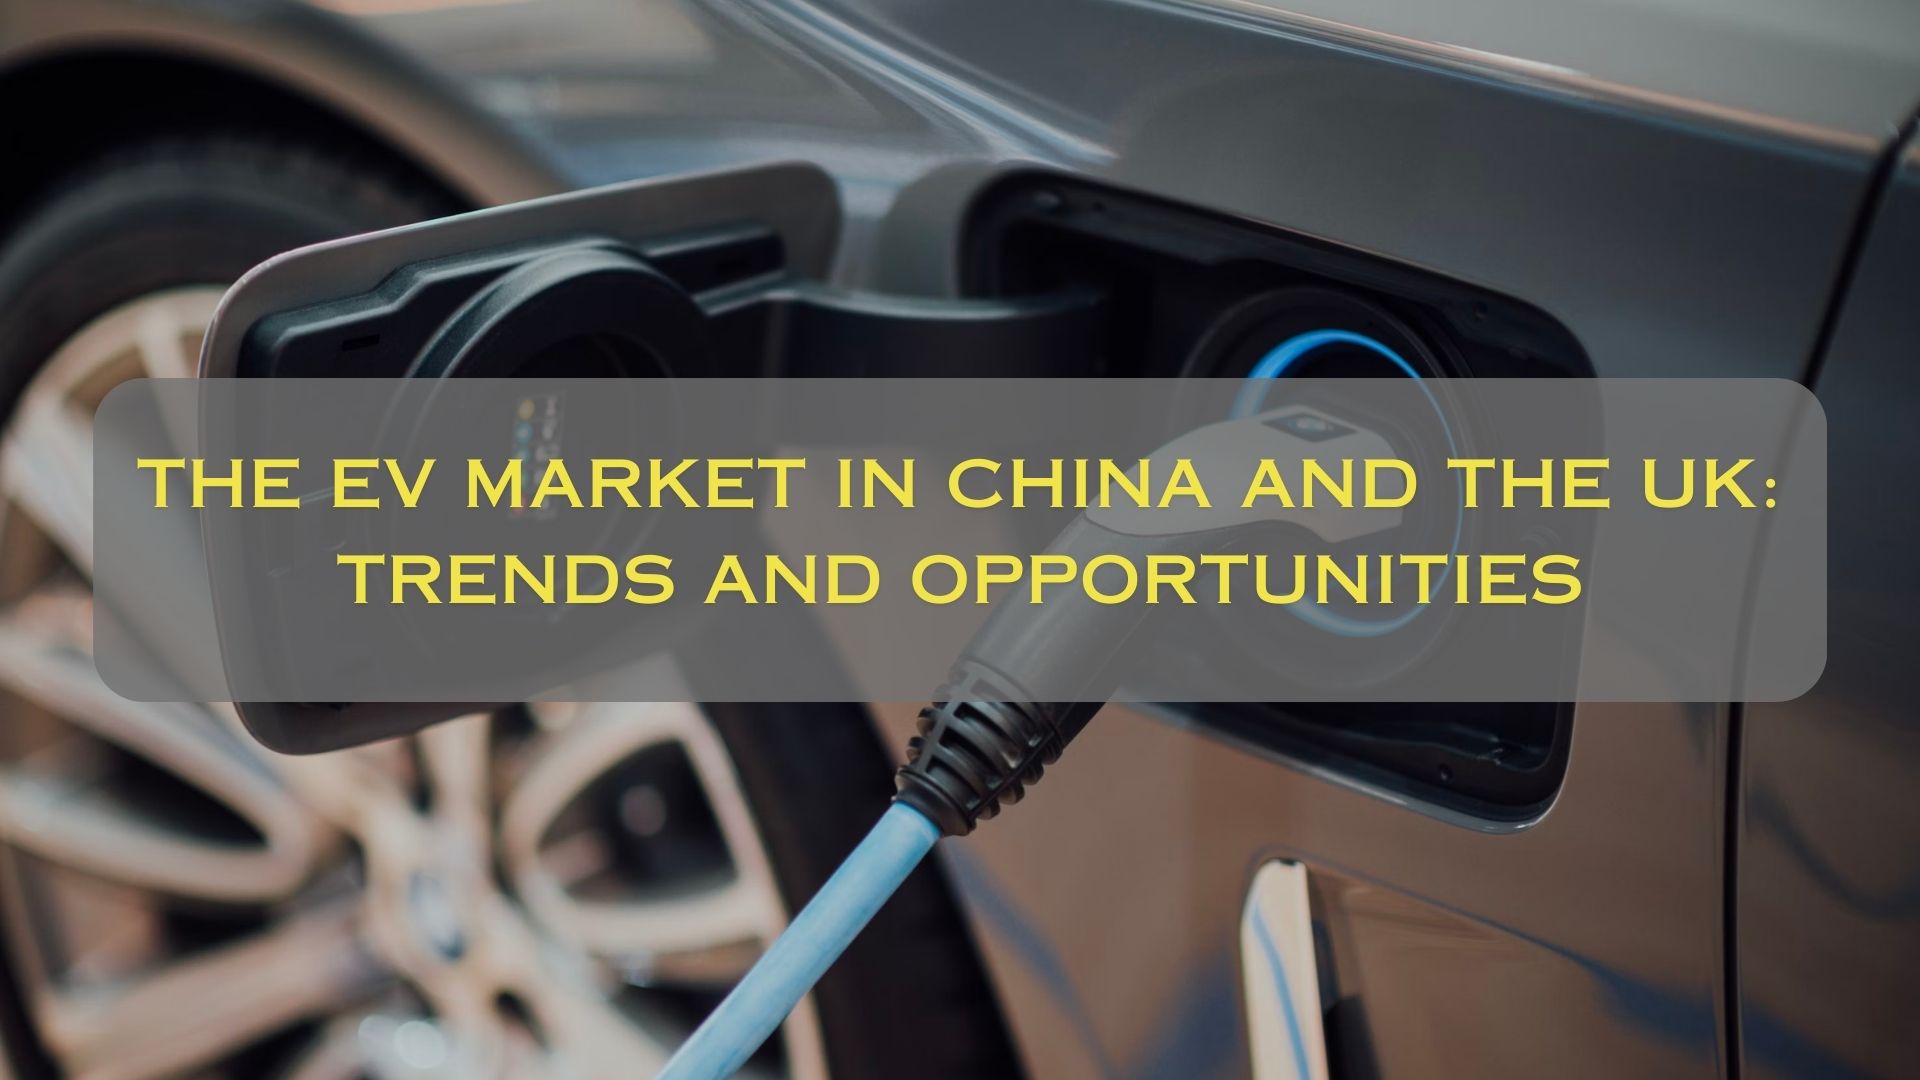 The EV market in China and the UK: trends and opportunities